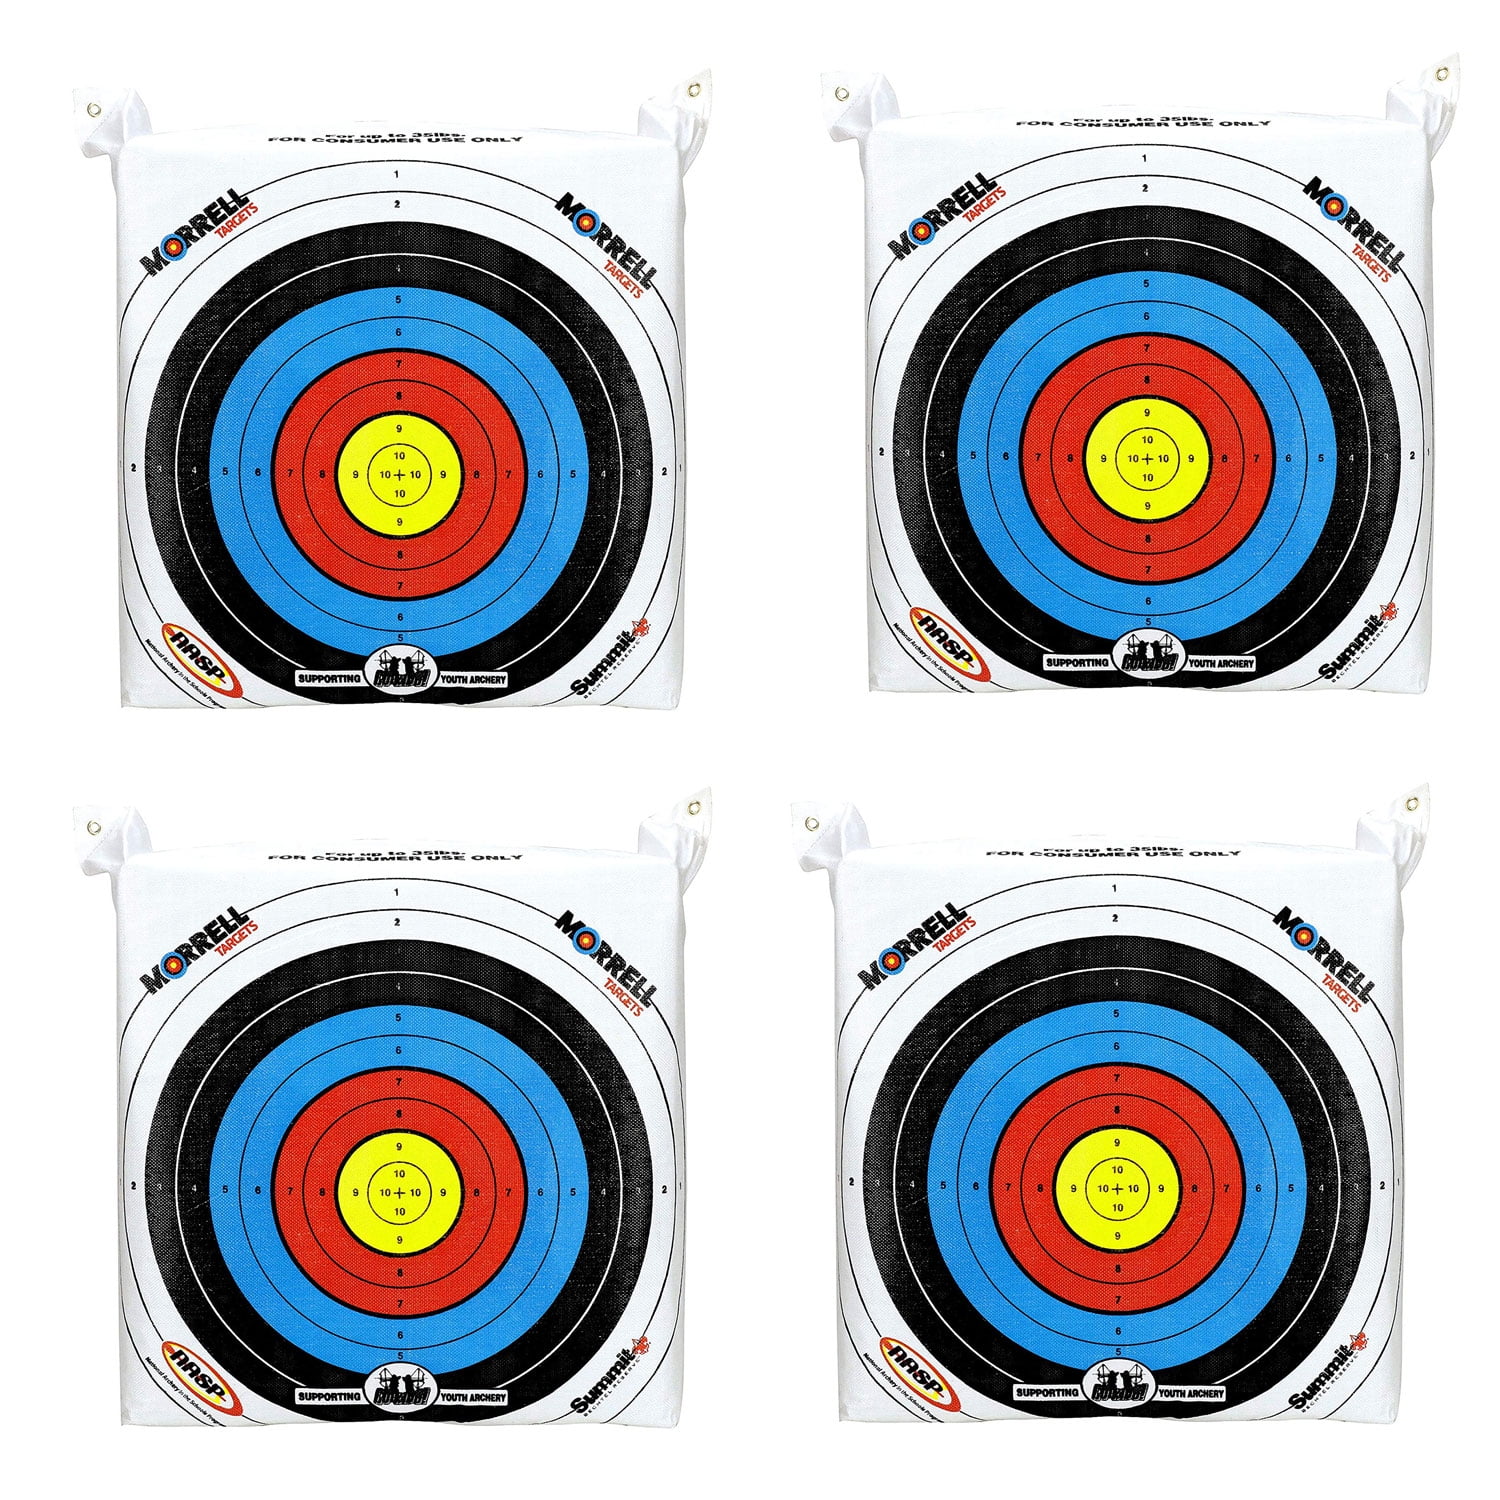 Youth Archery Target Block for Backyard Archery Targets for Backyard Arrow Target Block Arrow Targets for Shooting Outdoor Arrow Targets for Backyard with Archery Arm Guard 